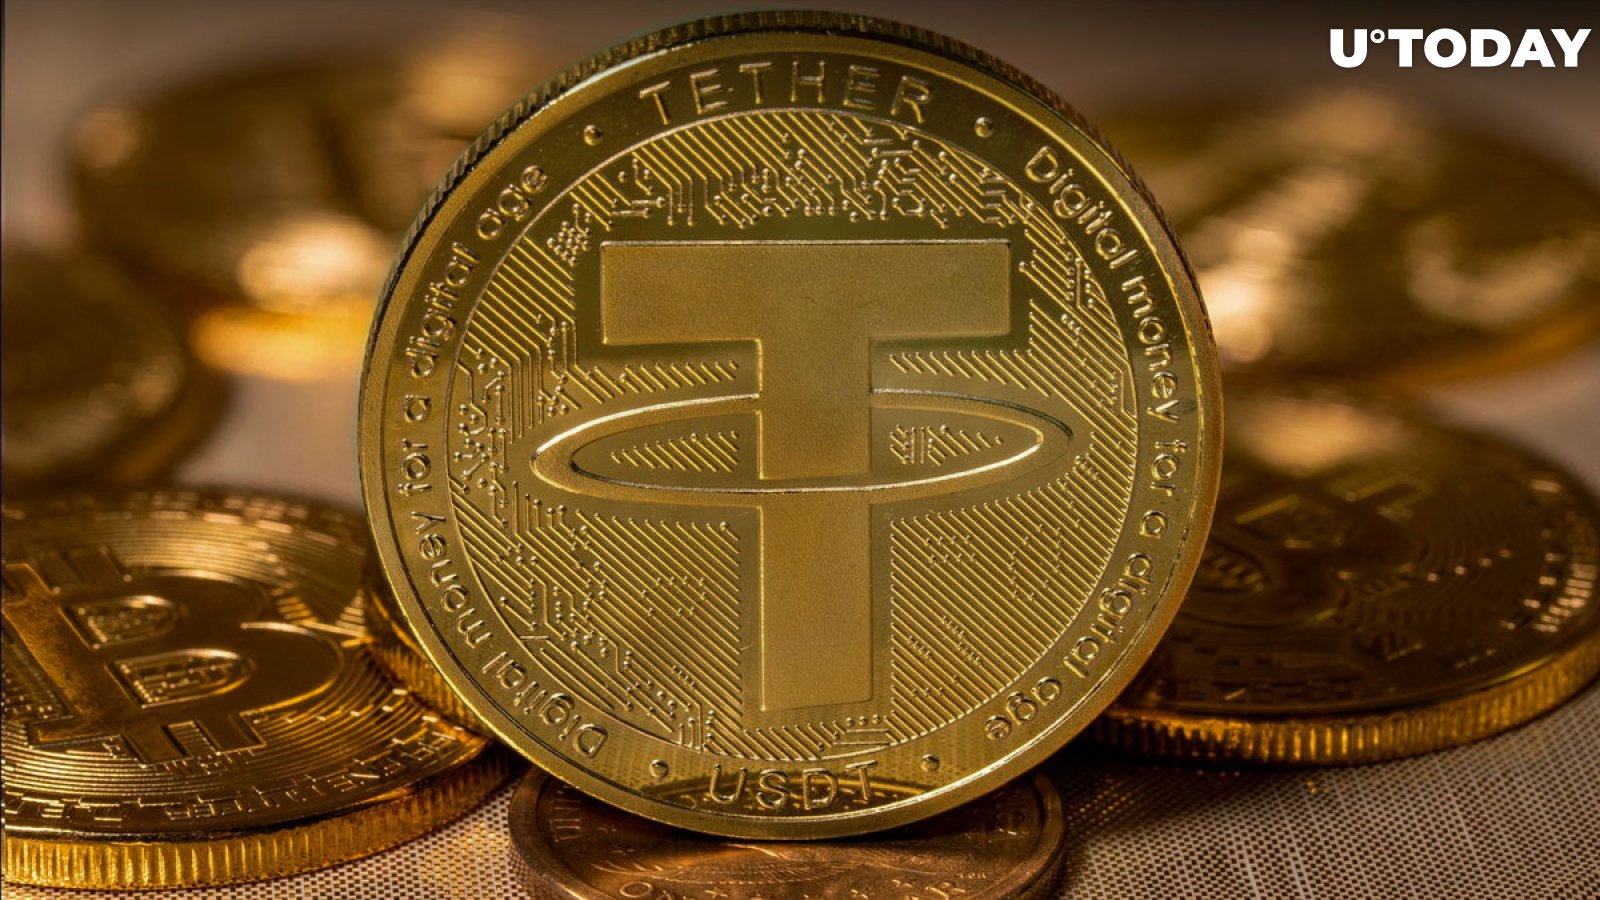 Bitcoin (BTC) Mining Software Libraries to Be Released by Tether